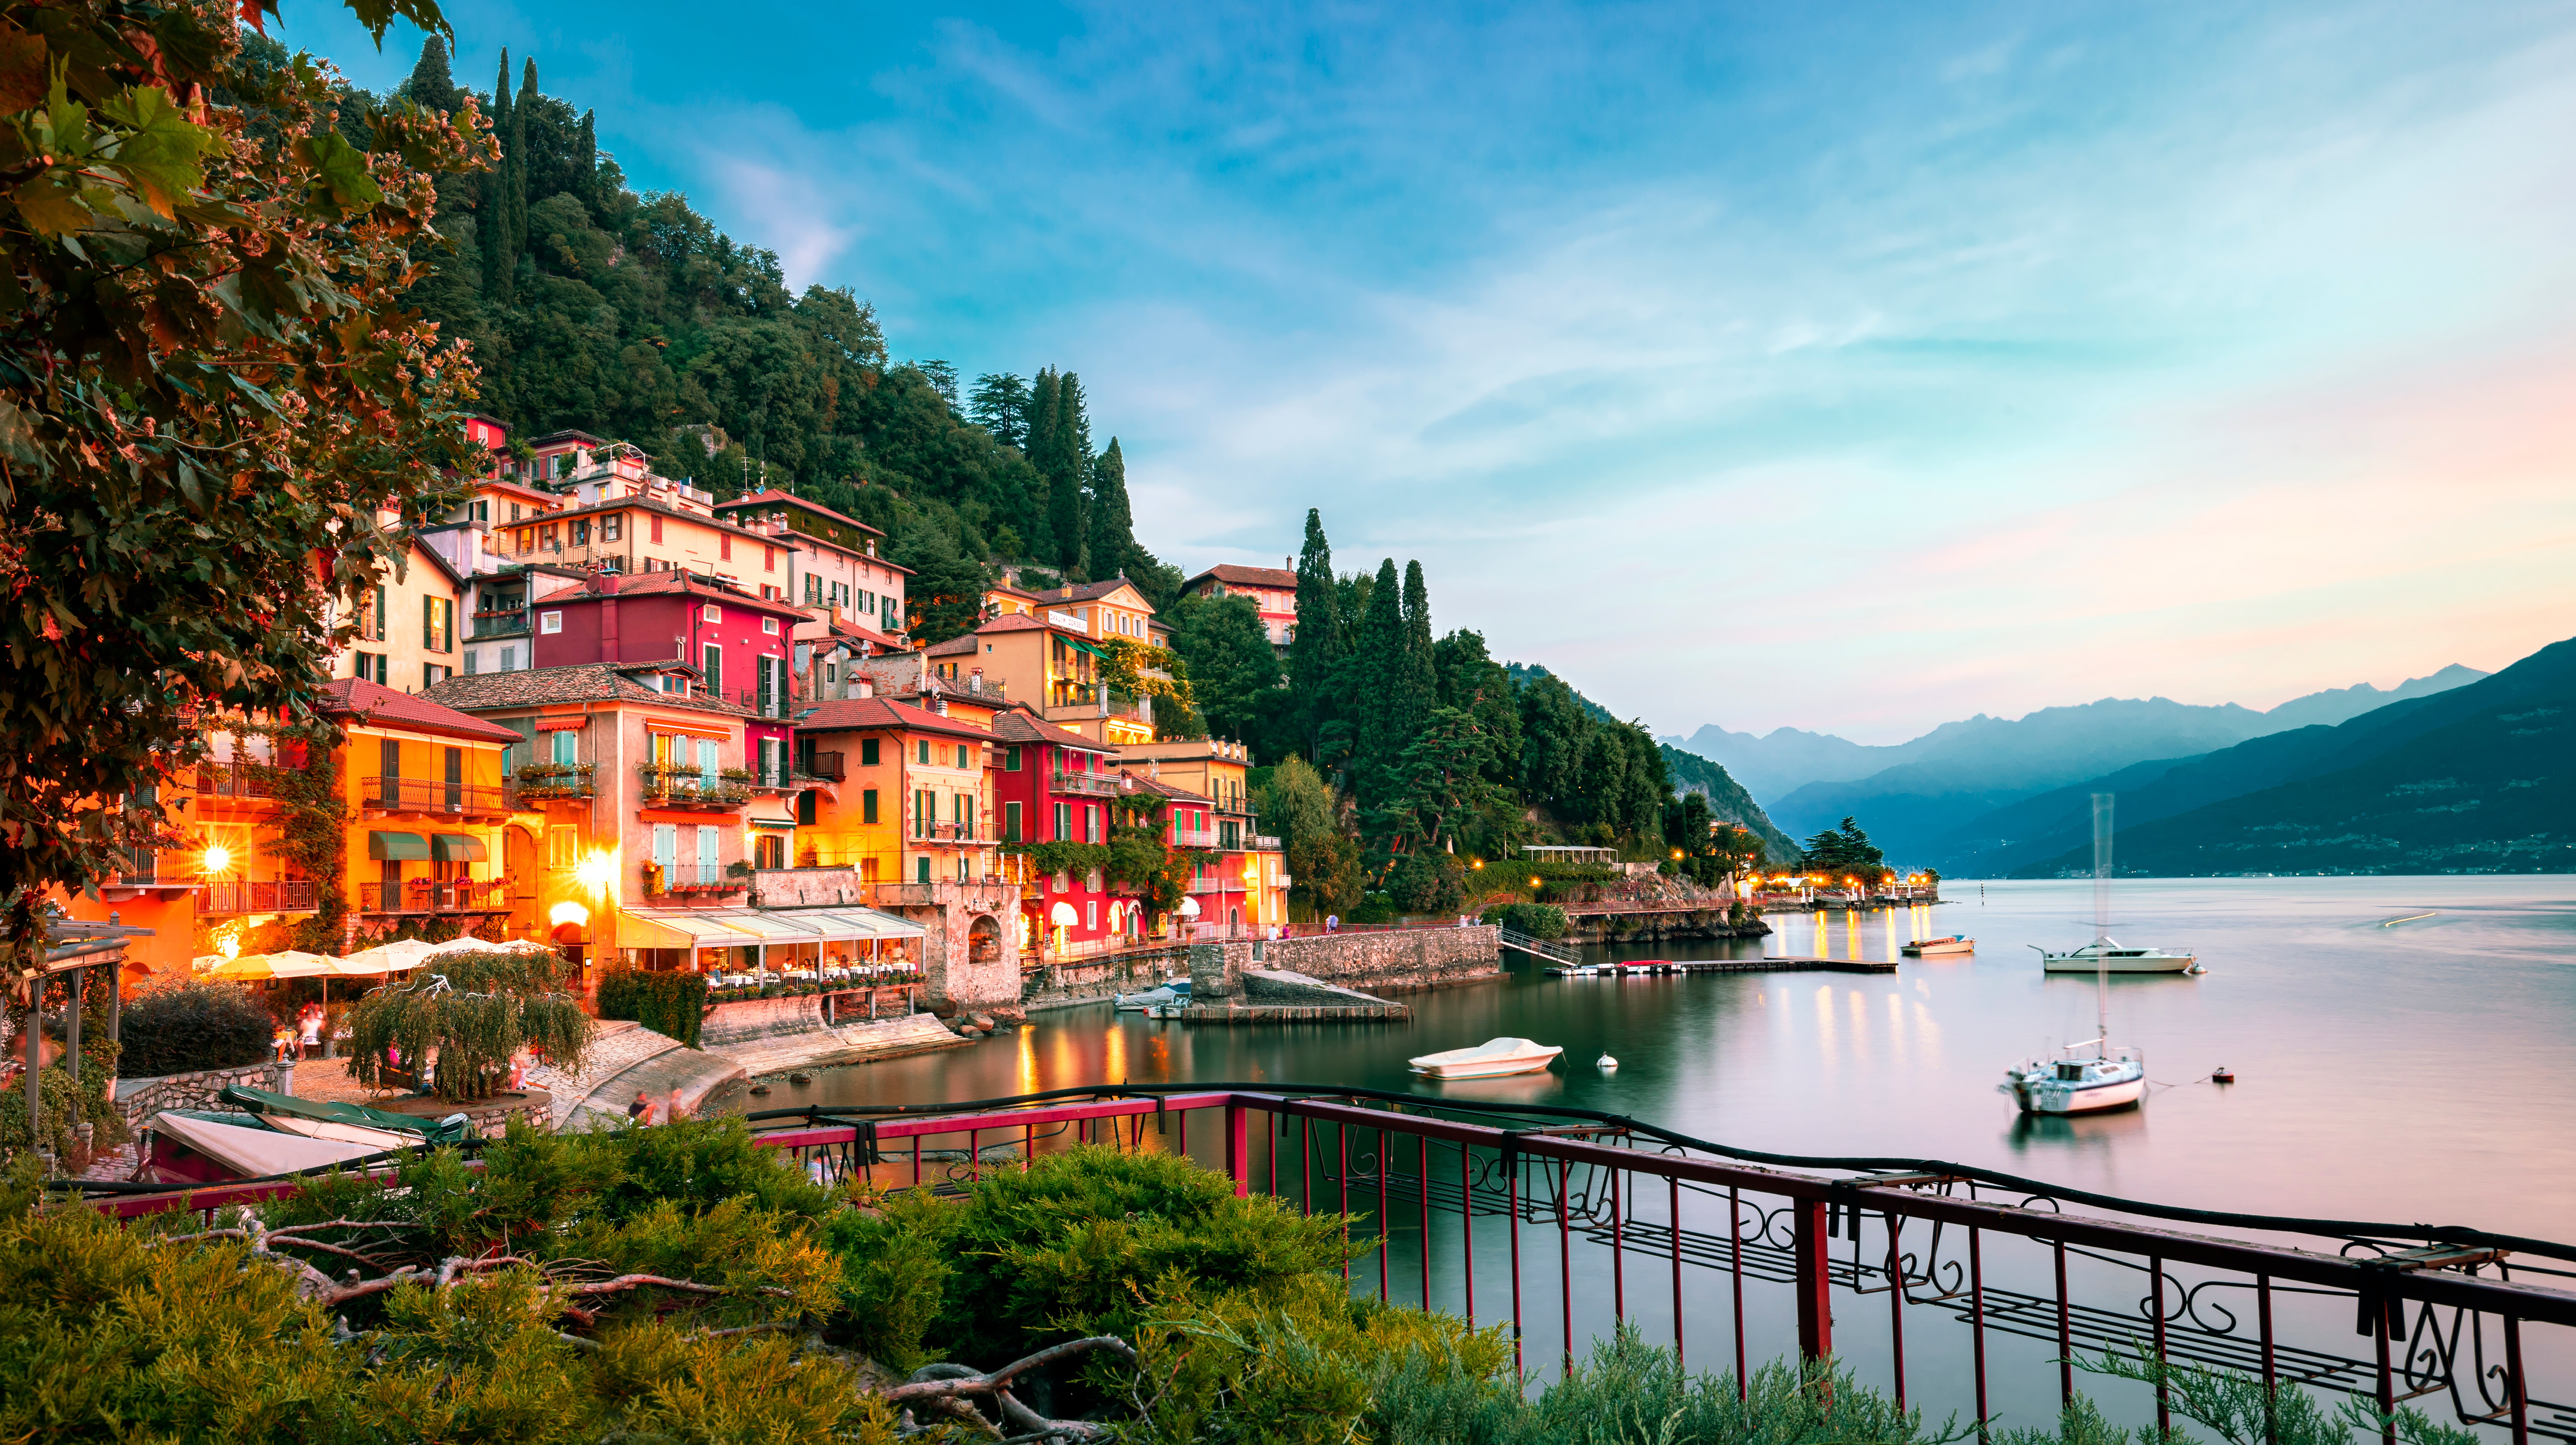 Lake Como sunsets are a firm highlight of this magical cruise of Greek Isles and Italy